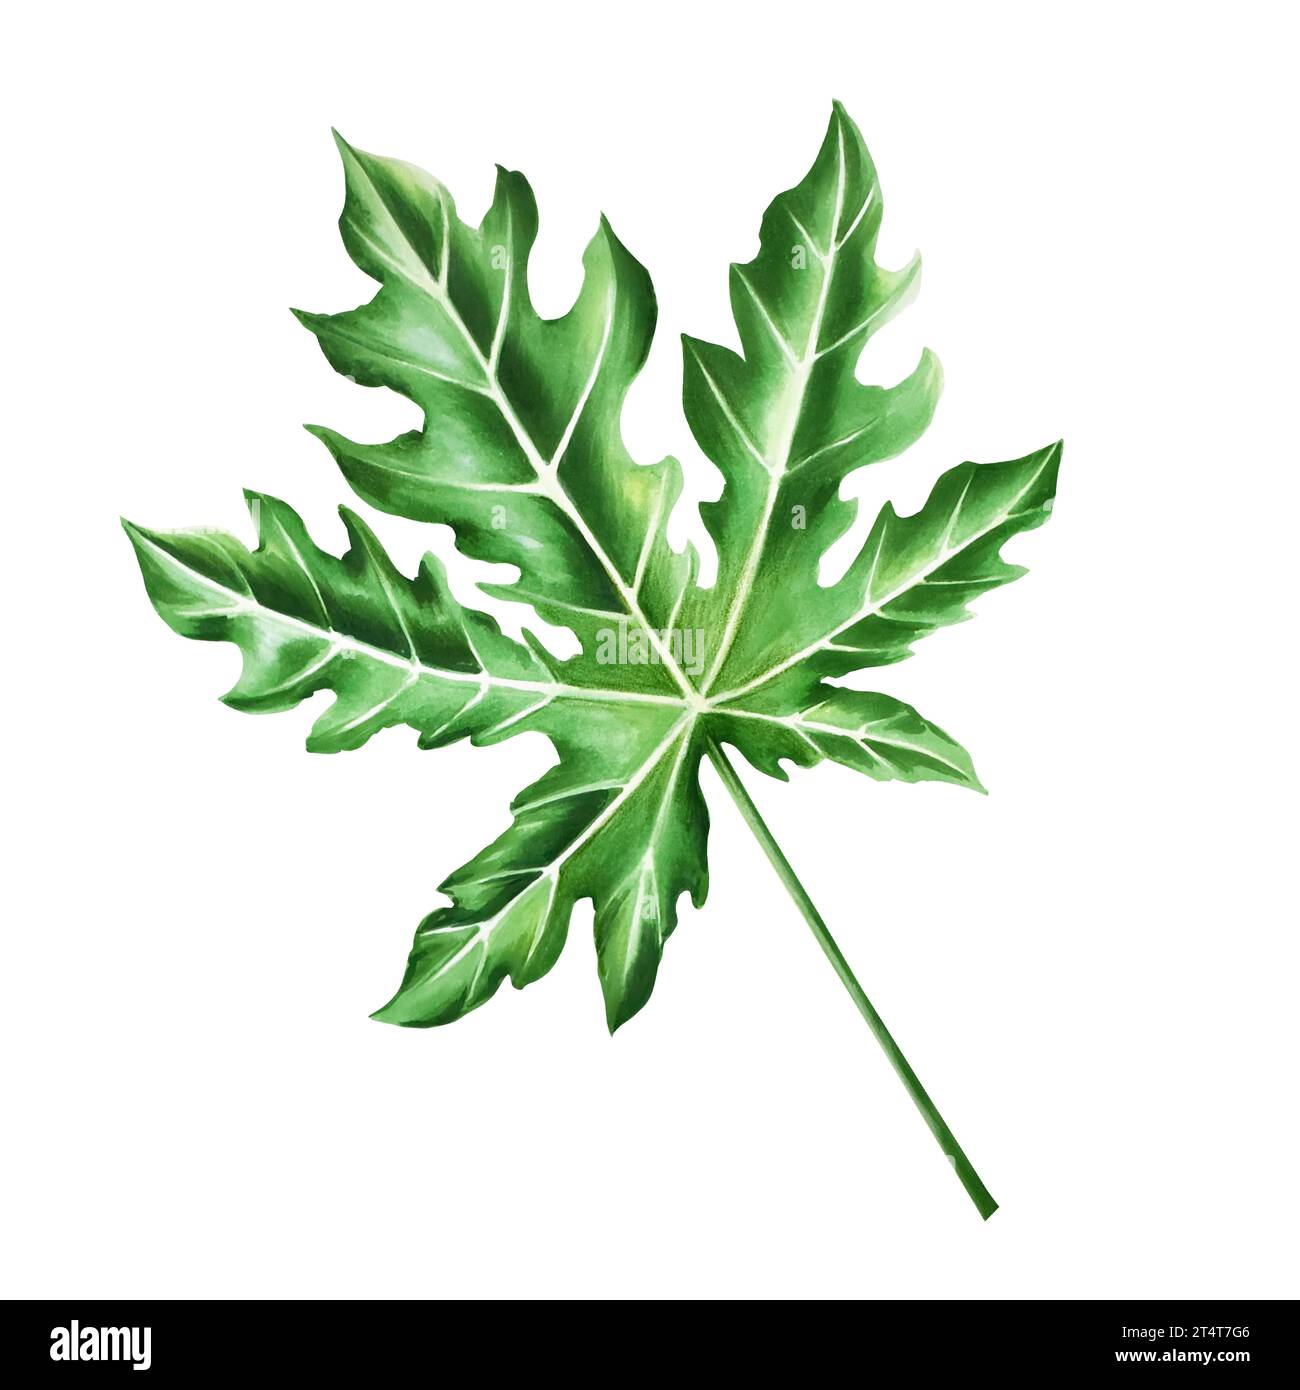 Vector Graphics of Papaya Leaves Stock Vector - Illustration of herbal,  isolated: 229328866